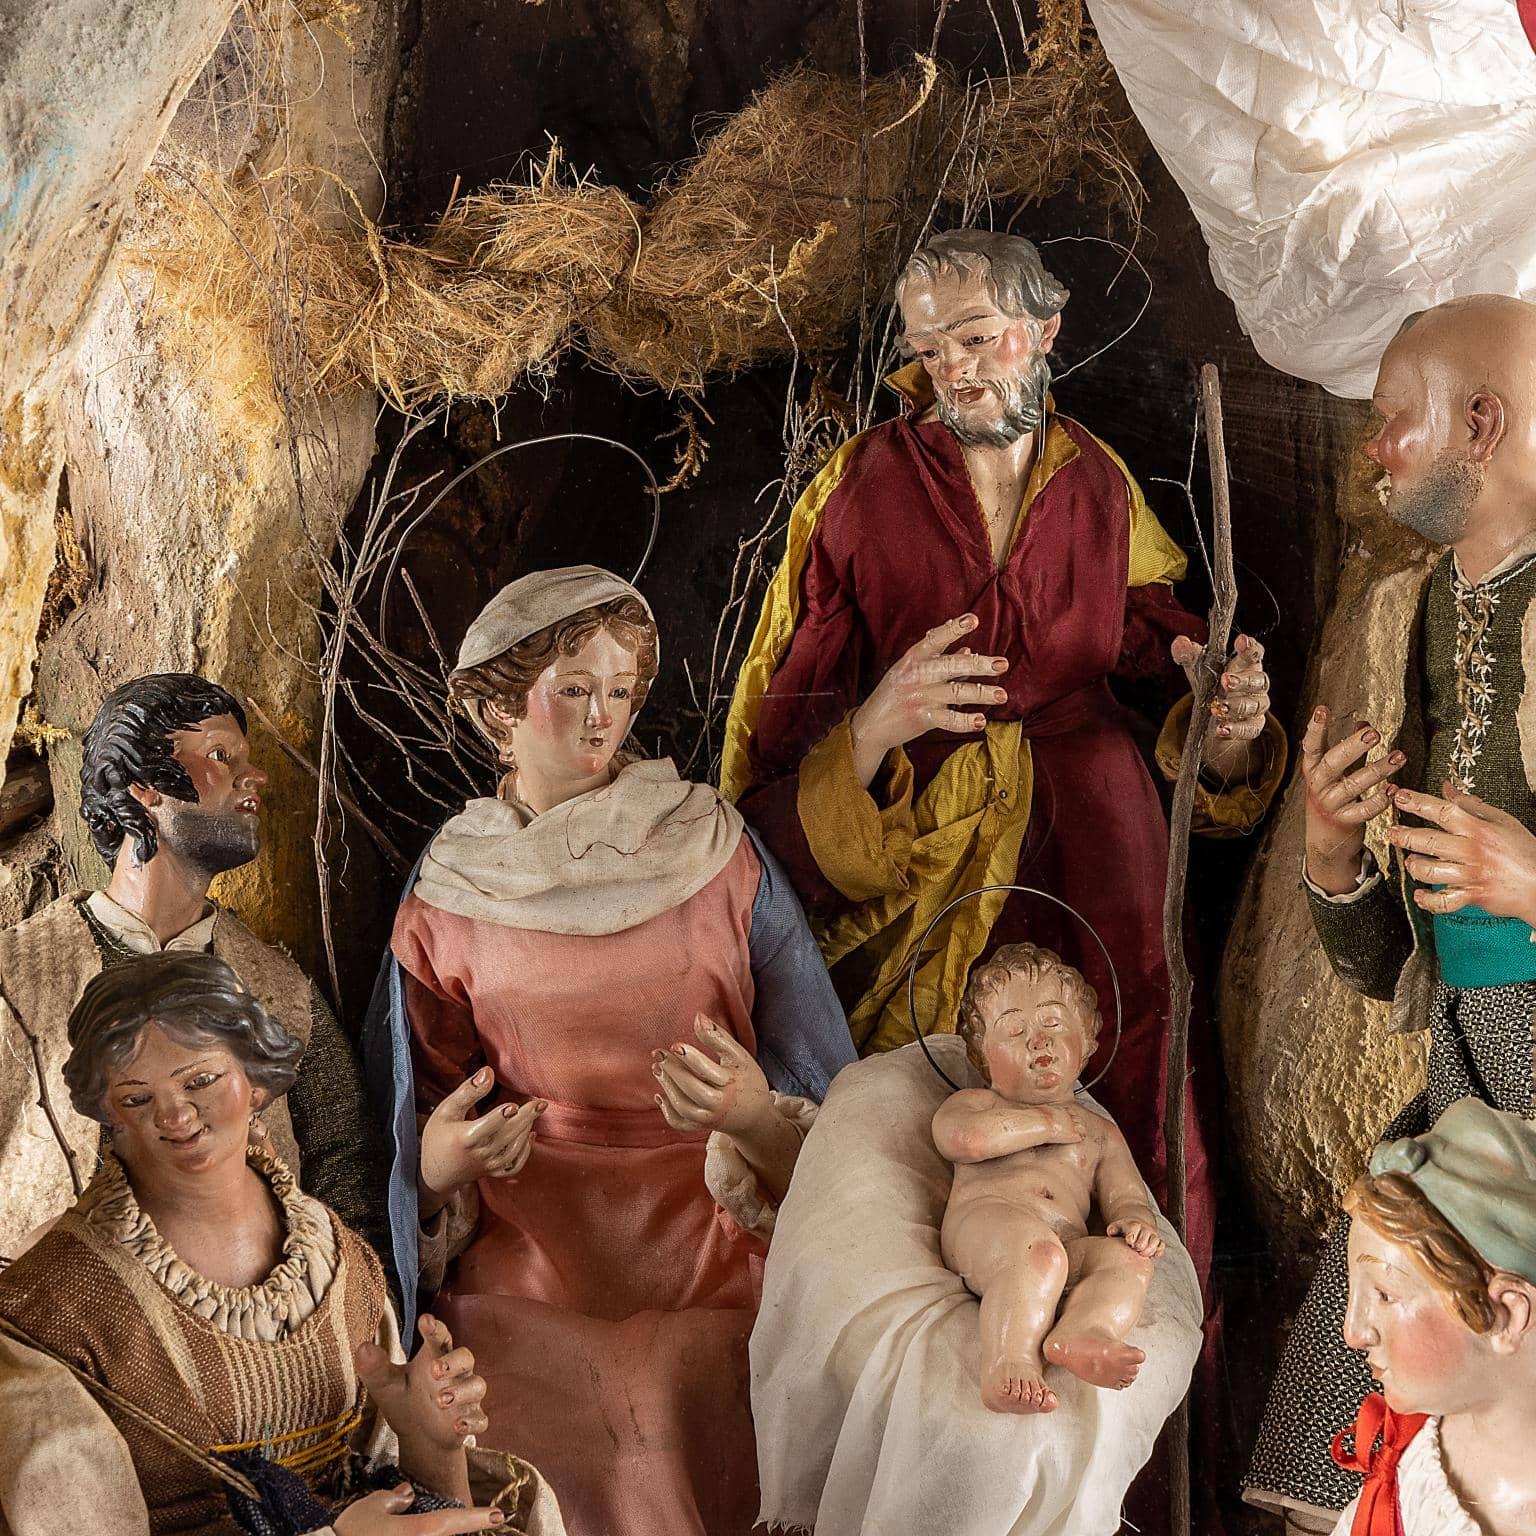 Nativity scene with the Holy Family in a cave, surrounded by the common faithful led by the angel who gave them the announcement, placed in the upper part. The figures have hands and faces in terracotta painted in polychrome and are dressed in cloth